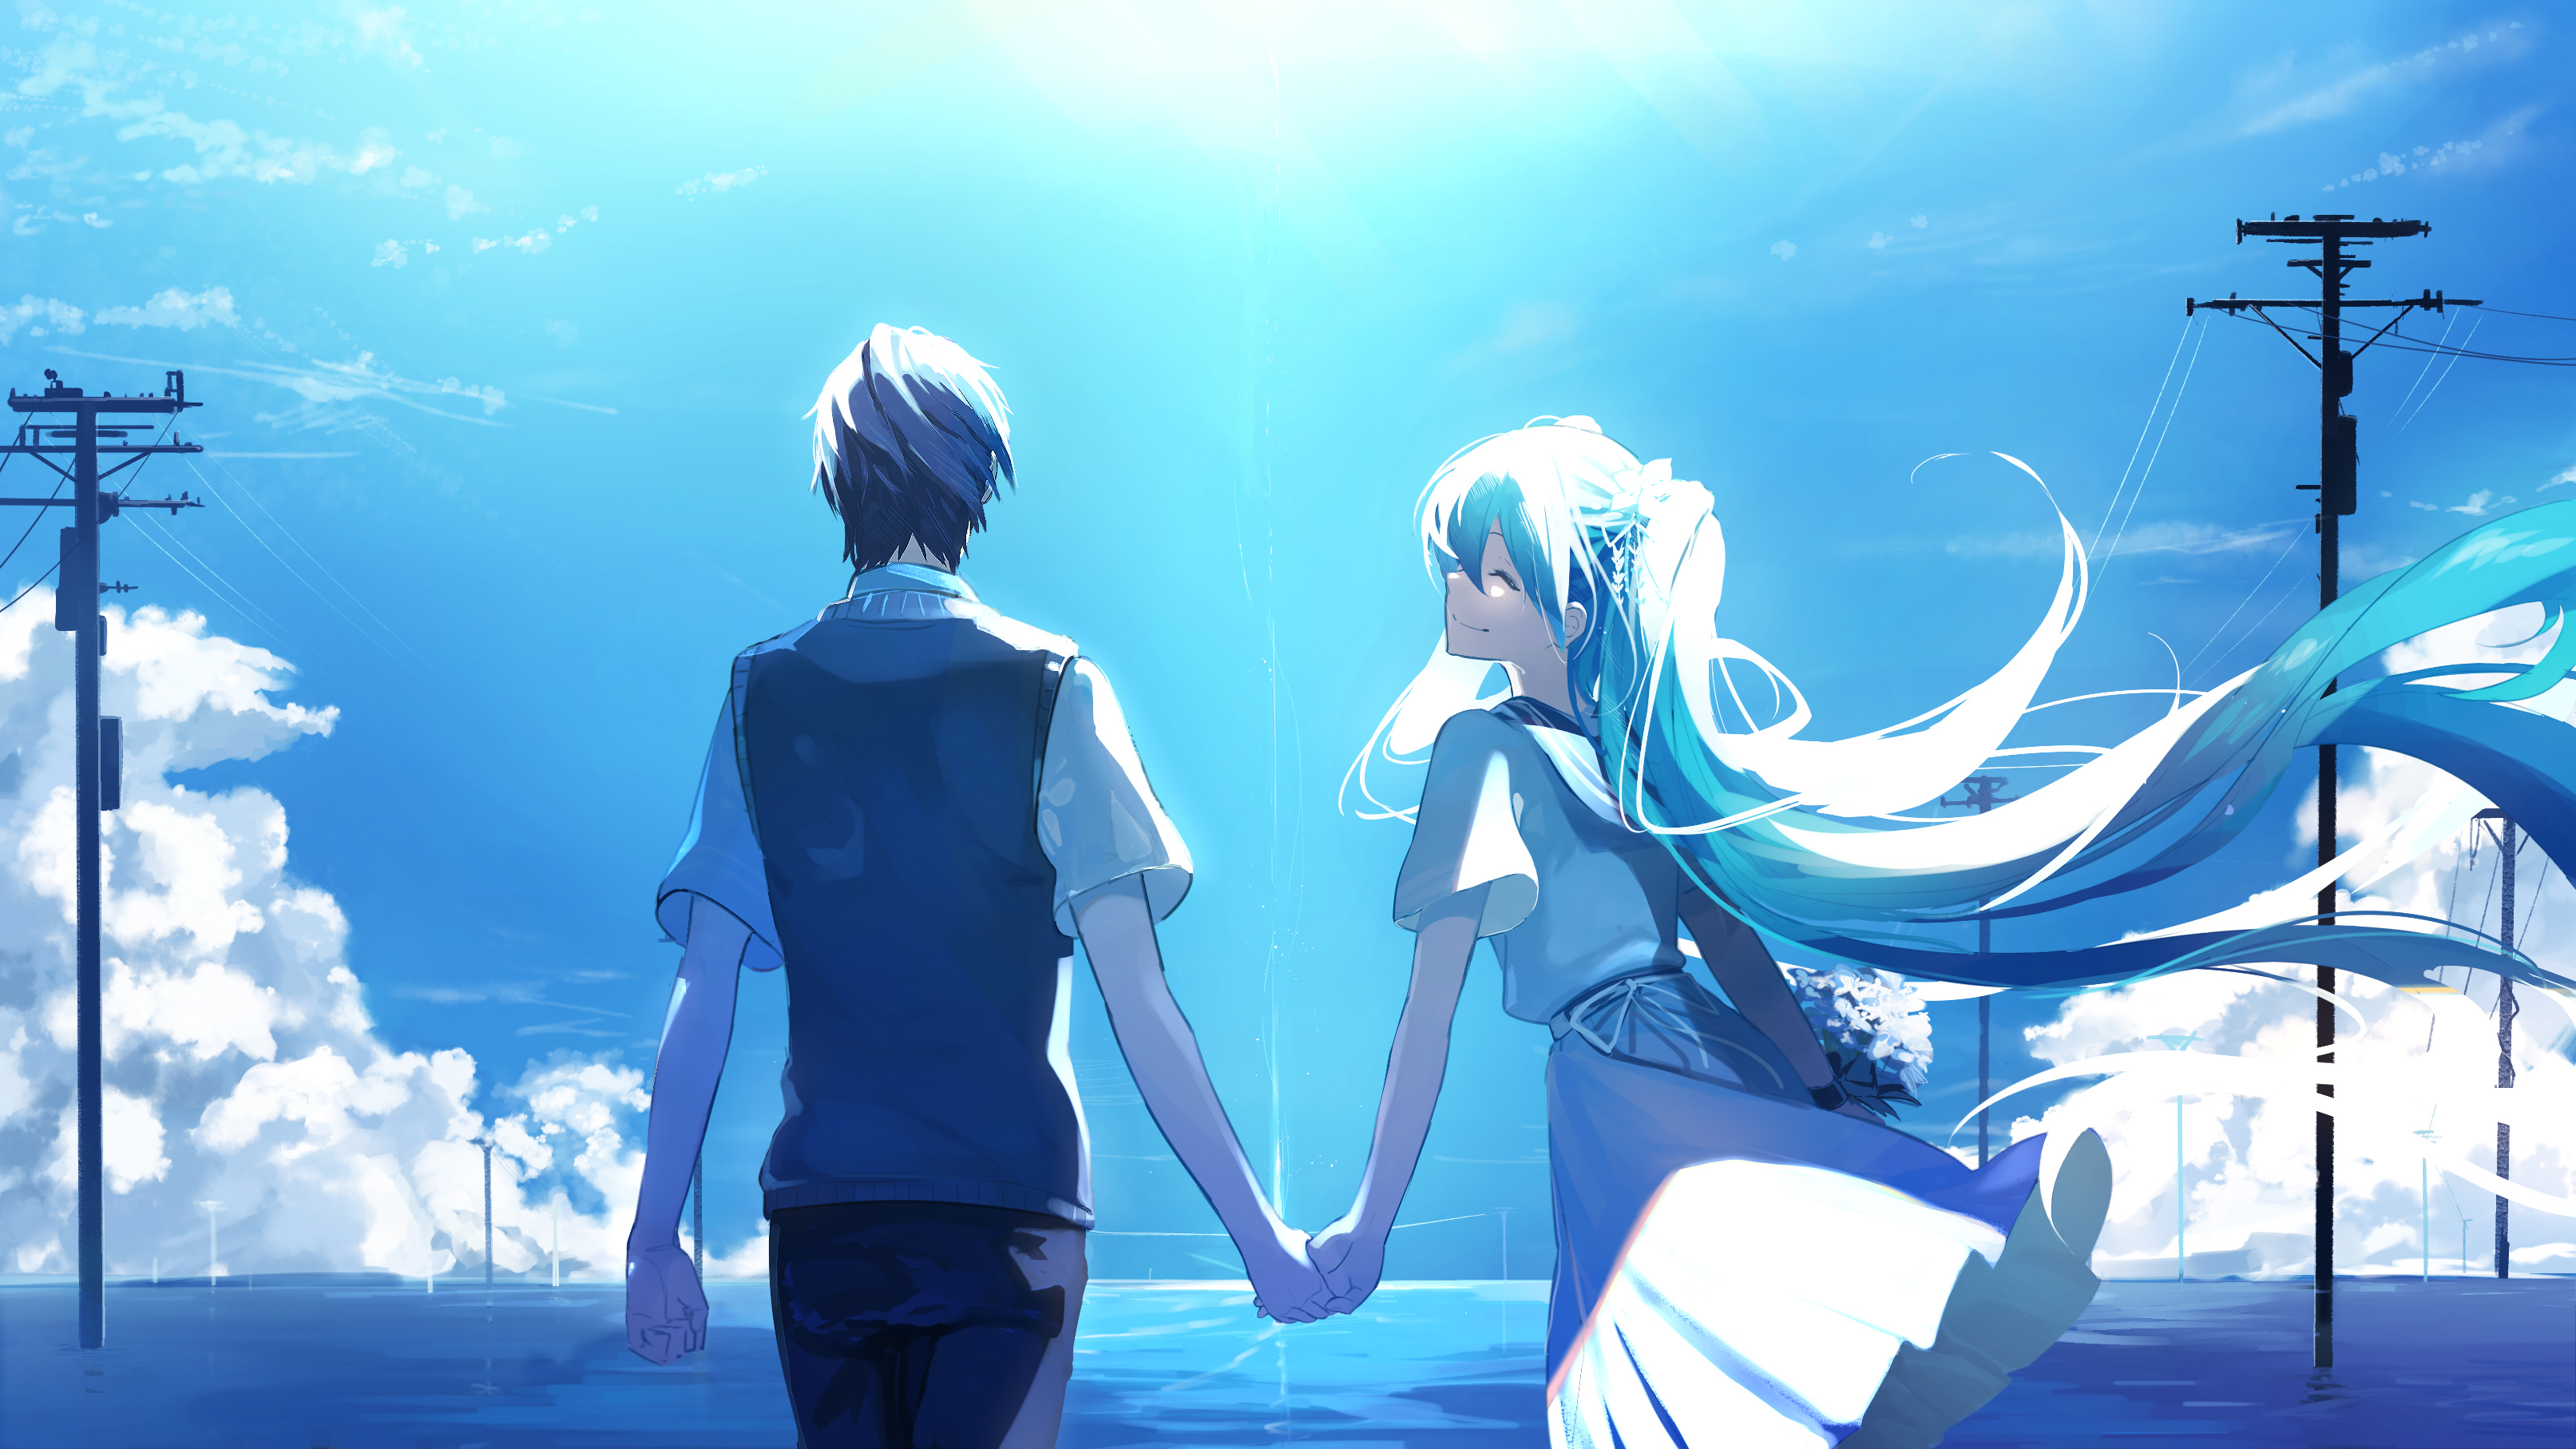 Anime Couple Holding Hands Hatsune Miku Hd Anime 4k Wallpapers Images Backgrounds Photos And Pictures